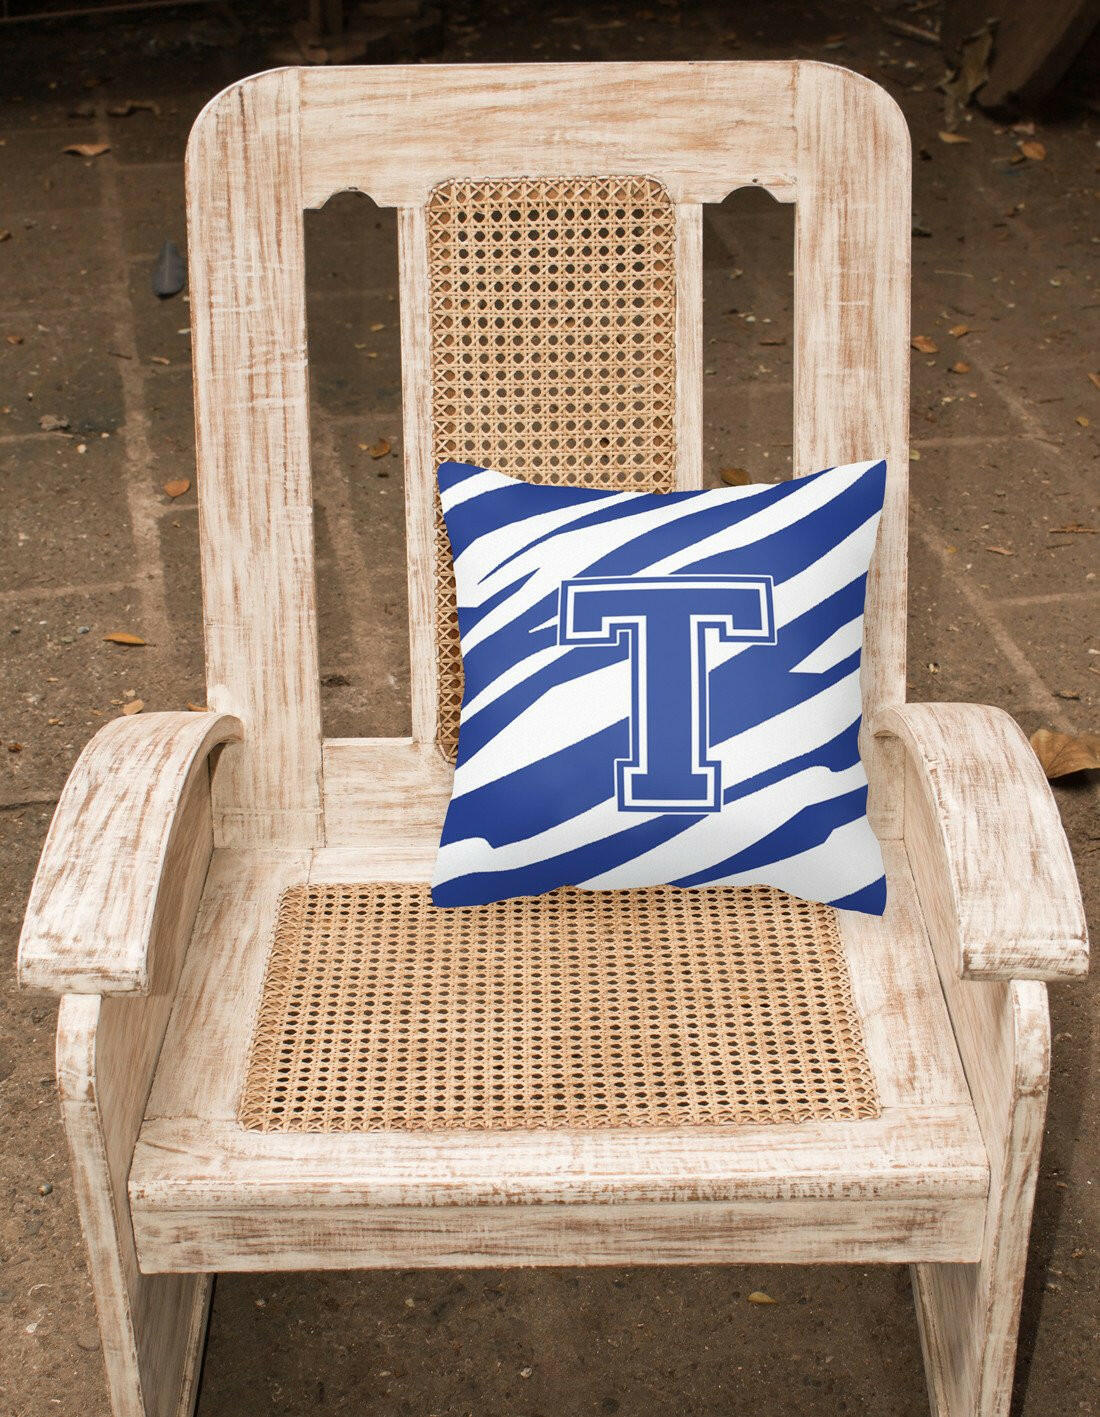 Monogram Initial T Tiger Stripe Blue and White Decorative Canvas Fabric Pillow - the-store.com